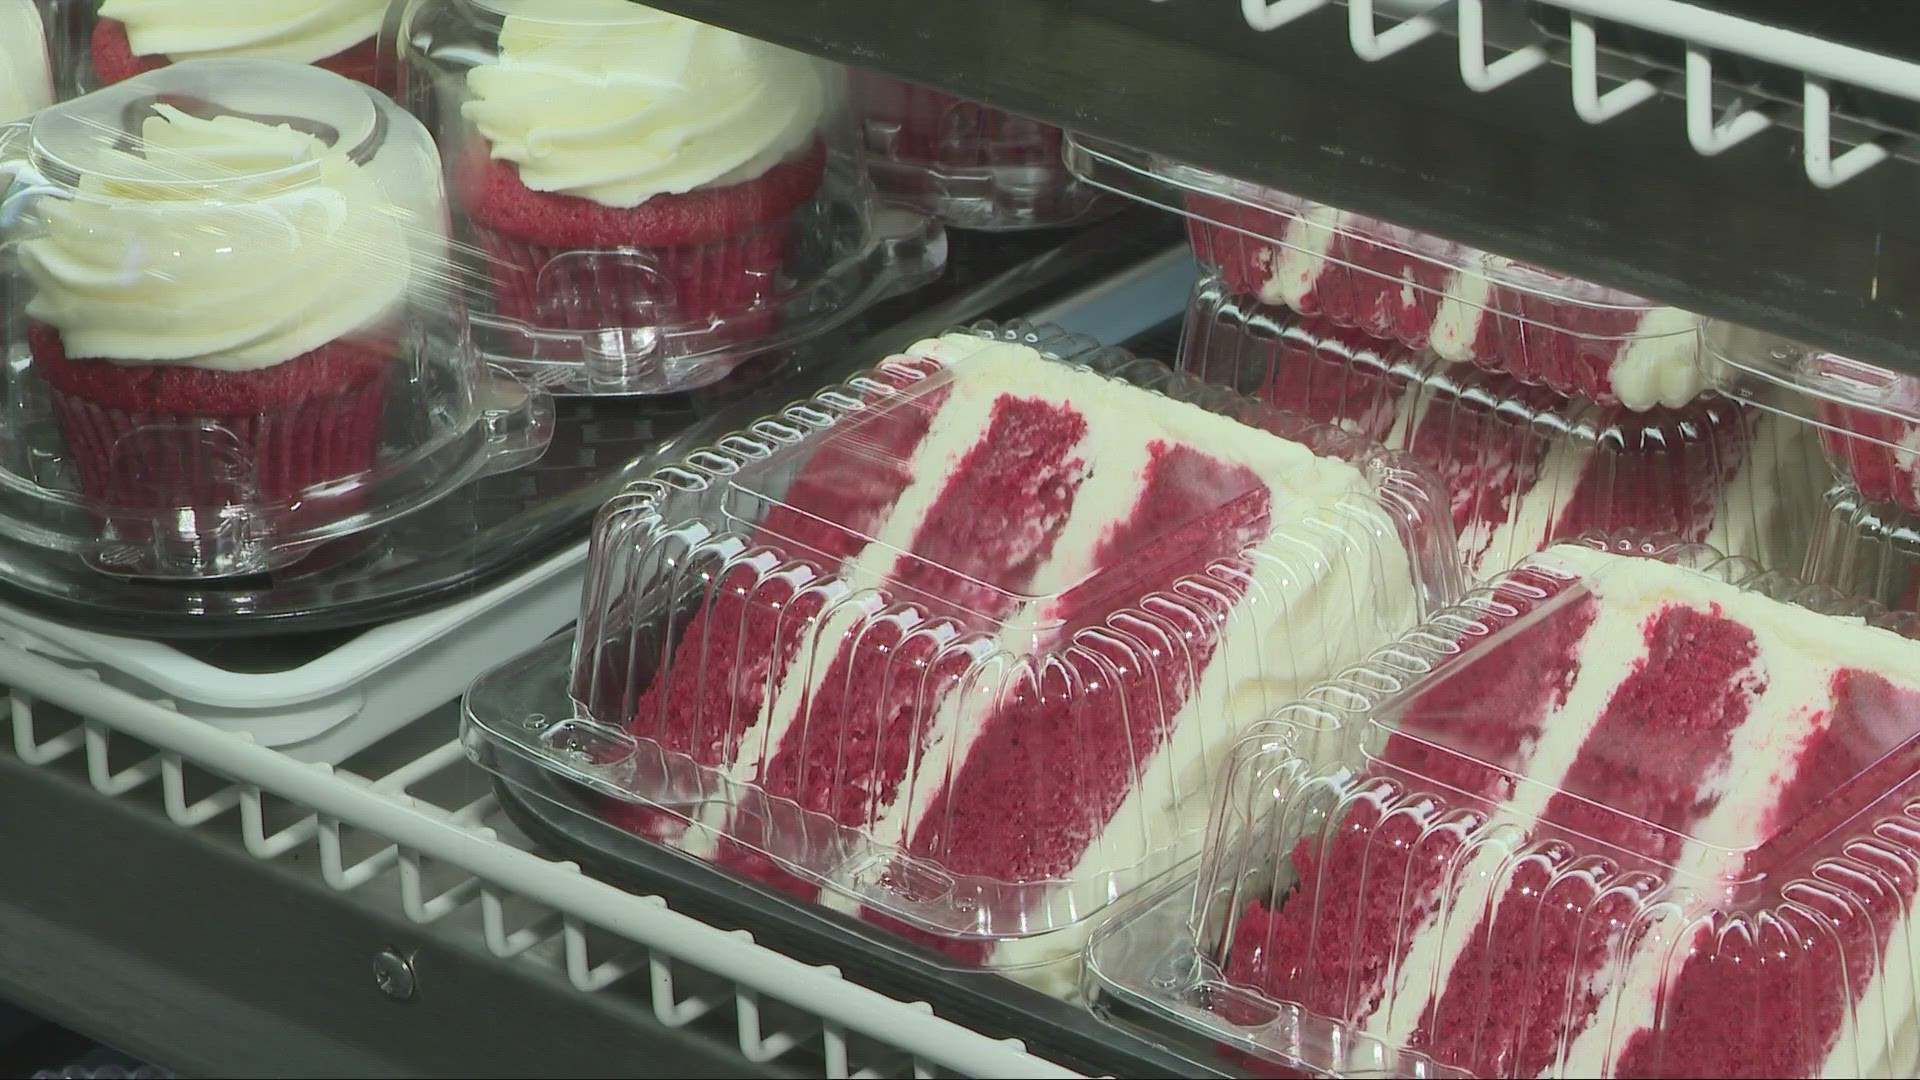 This sweet treat at the Beachwood Place has been dubbed a local favorite.